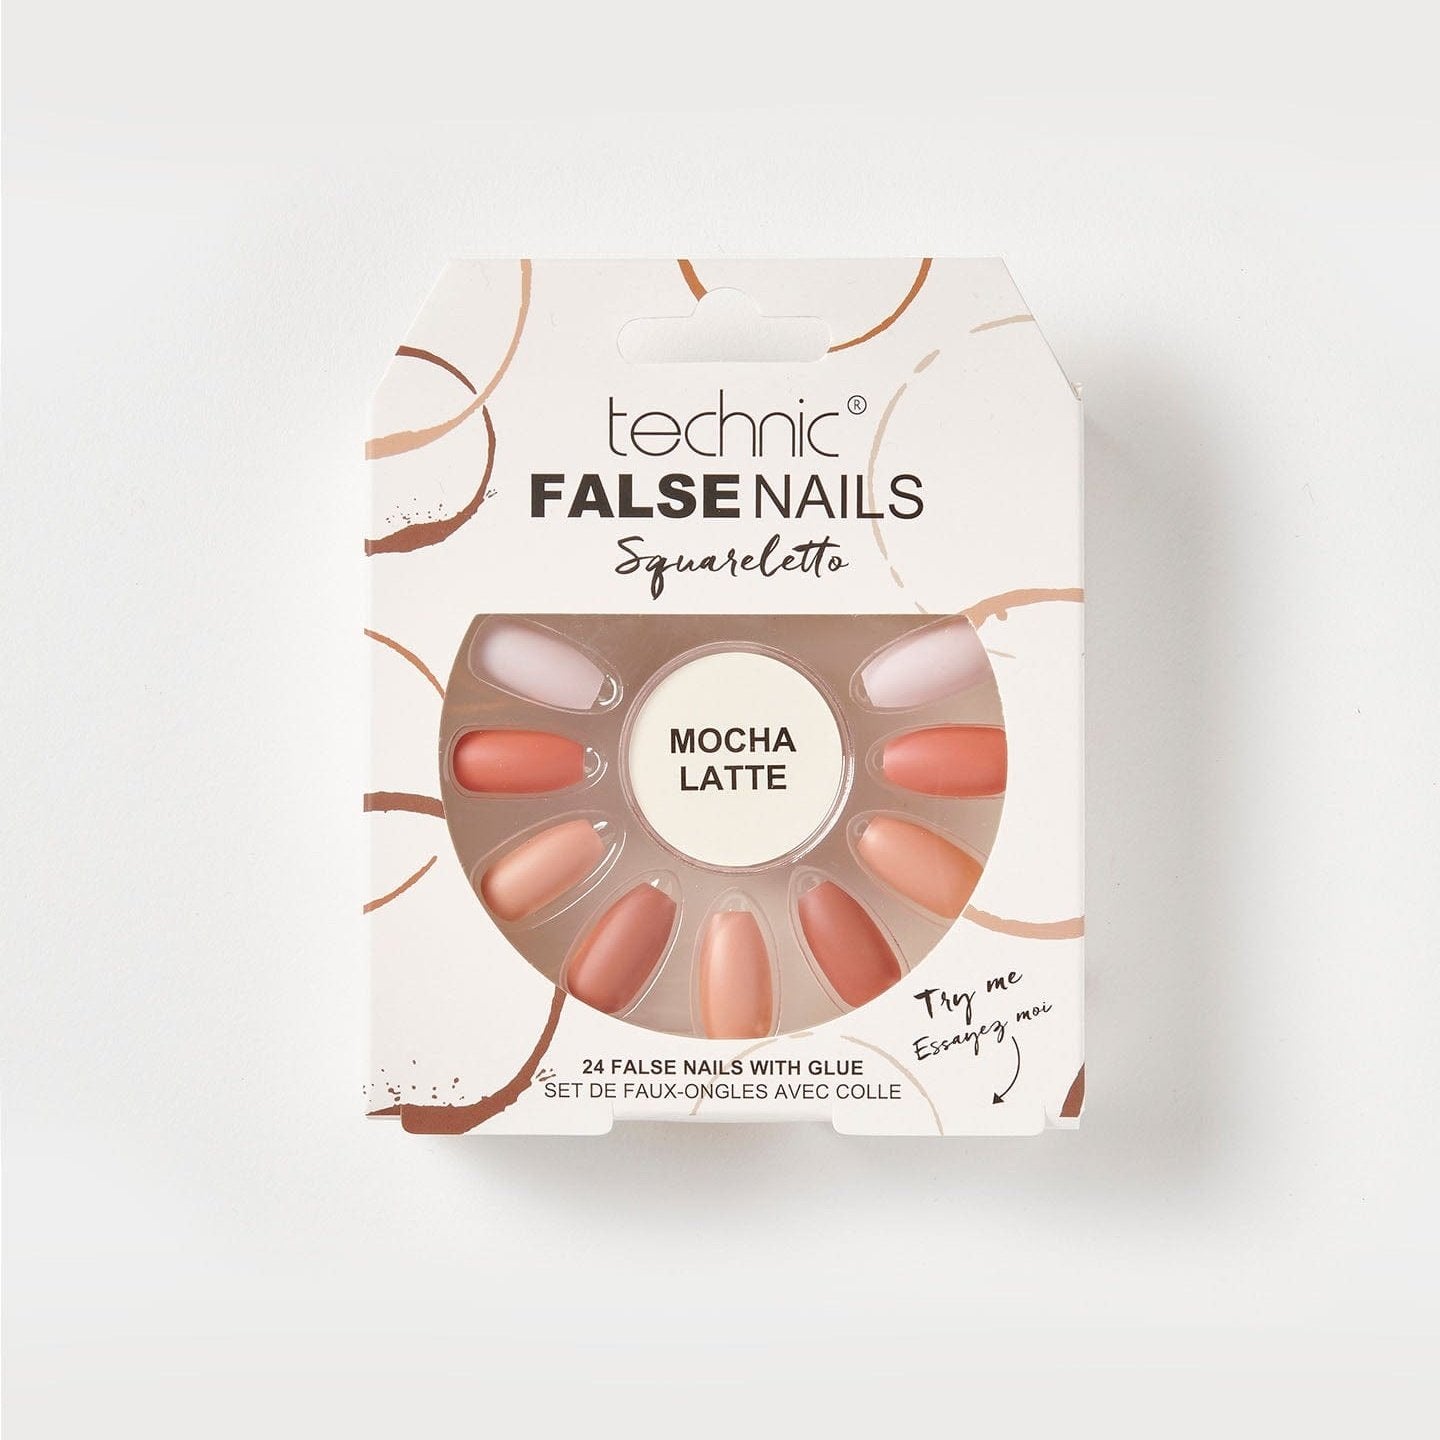 Dual Sticker French Line Clear Fake Nails Target With Soft Silicone Pad  Reusable Extension Mold Forms For Acrylic Prolong Manicure X0826 X08328  From Us_mississippi, $3.37 | DHgate.Com